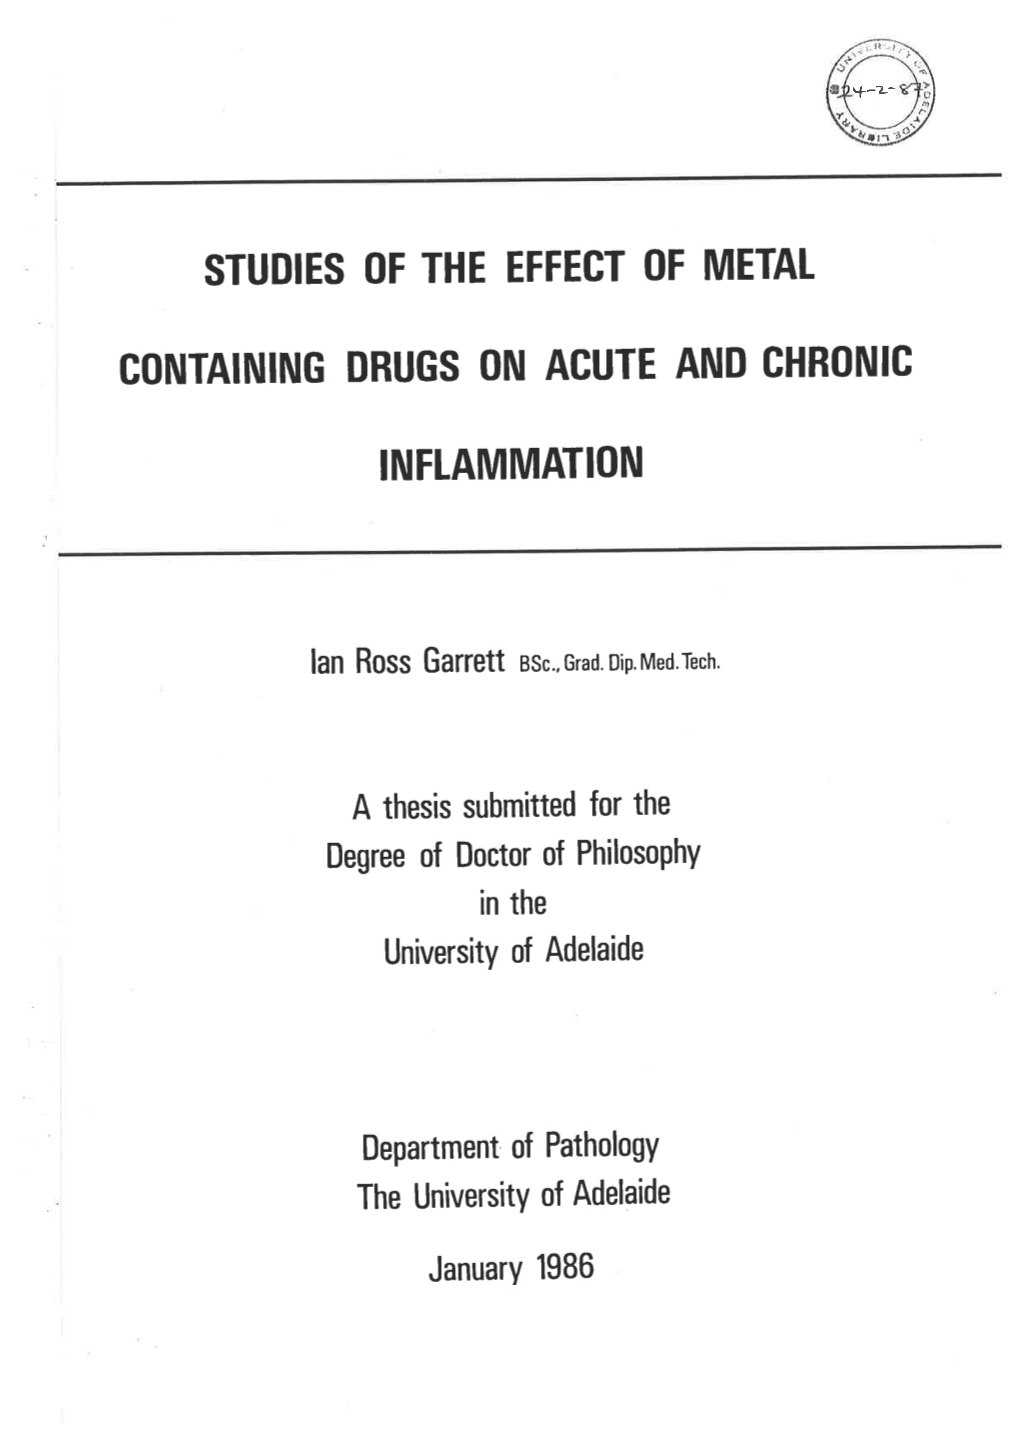 Studies of the Effect of Metal Containing Drugs on Acute and Chronic Inflammation